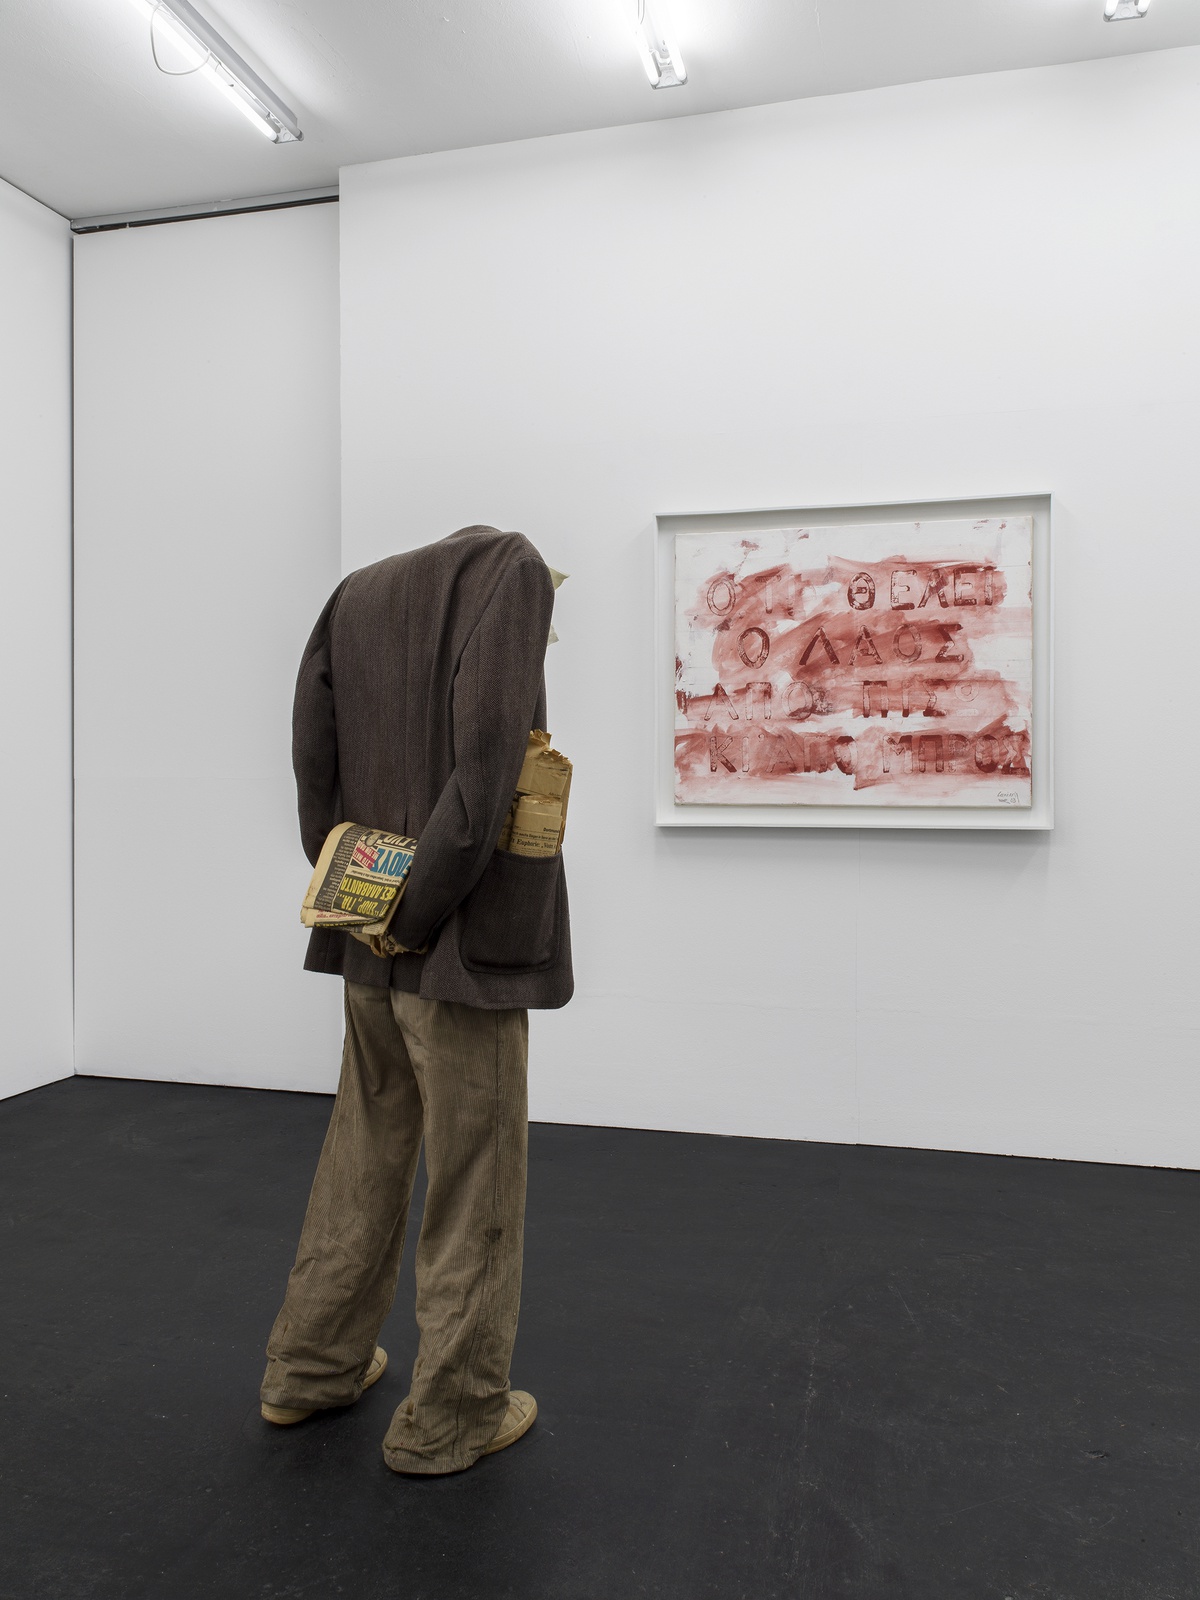 Vlassis Caniaris, Untitled, 2003installation, painting (mixed media on canvas, framed) and figure (wire mesh, clothes, shoes, newspaper)painting: 80 x 100 cm, framed 92.5 x 111.5 x 5.5 cmfigure: 148 x 48 x 35 cm